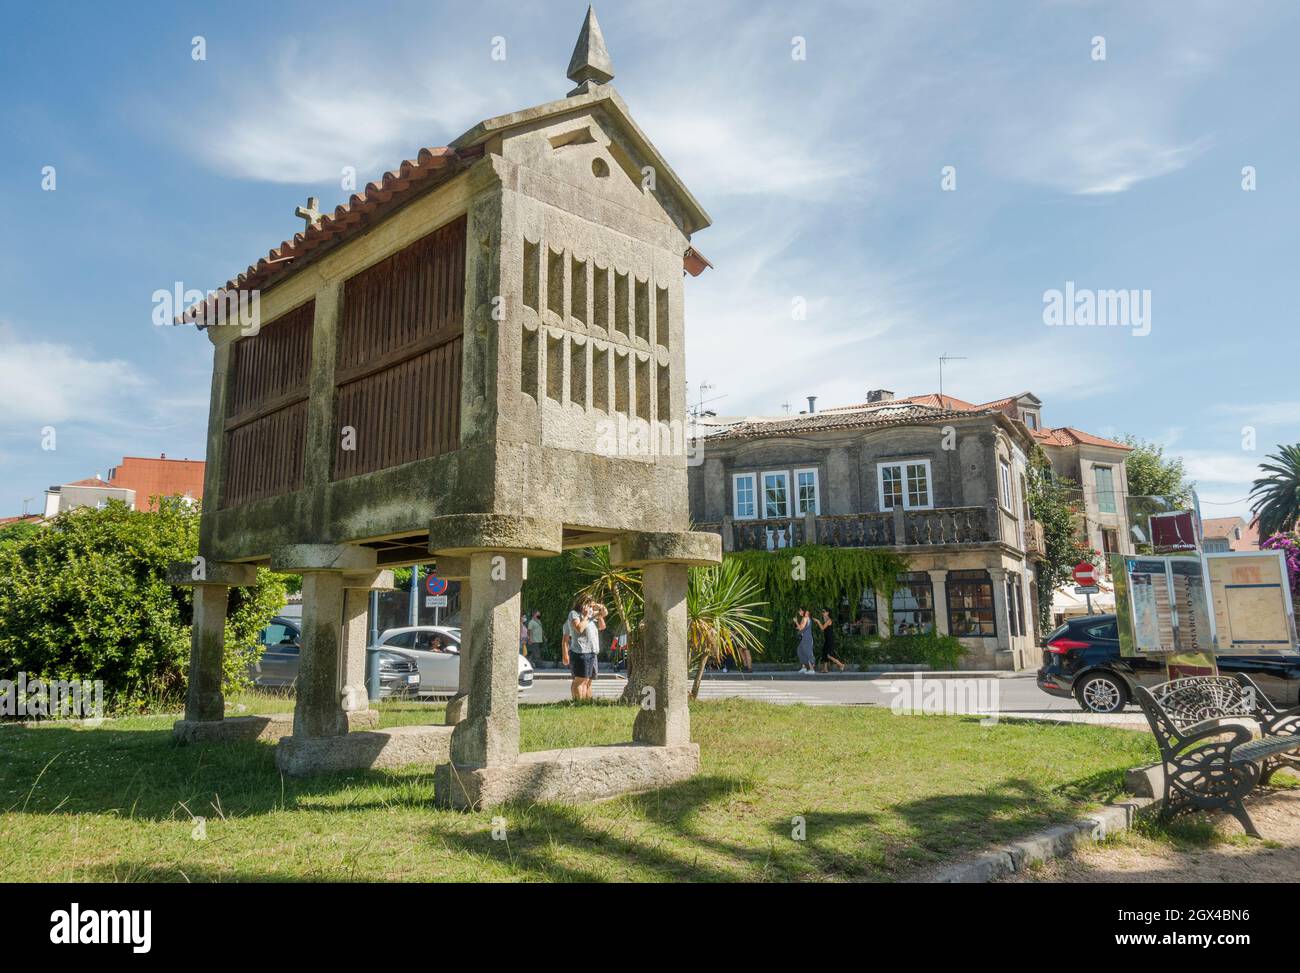 Typical old Galician granary (horreo) to protect fruits and corn harvest in the old town of Cambados, Pontevedra, Spain. Stock Photo